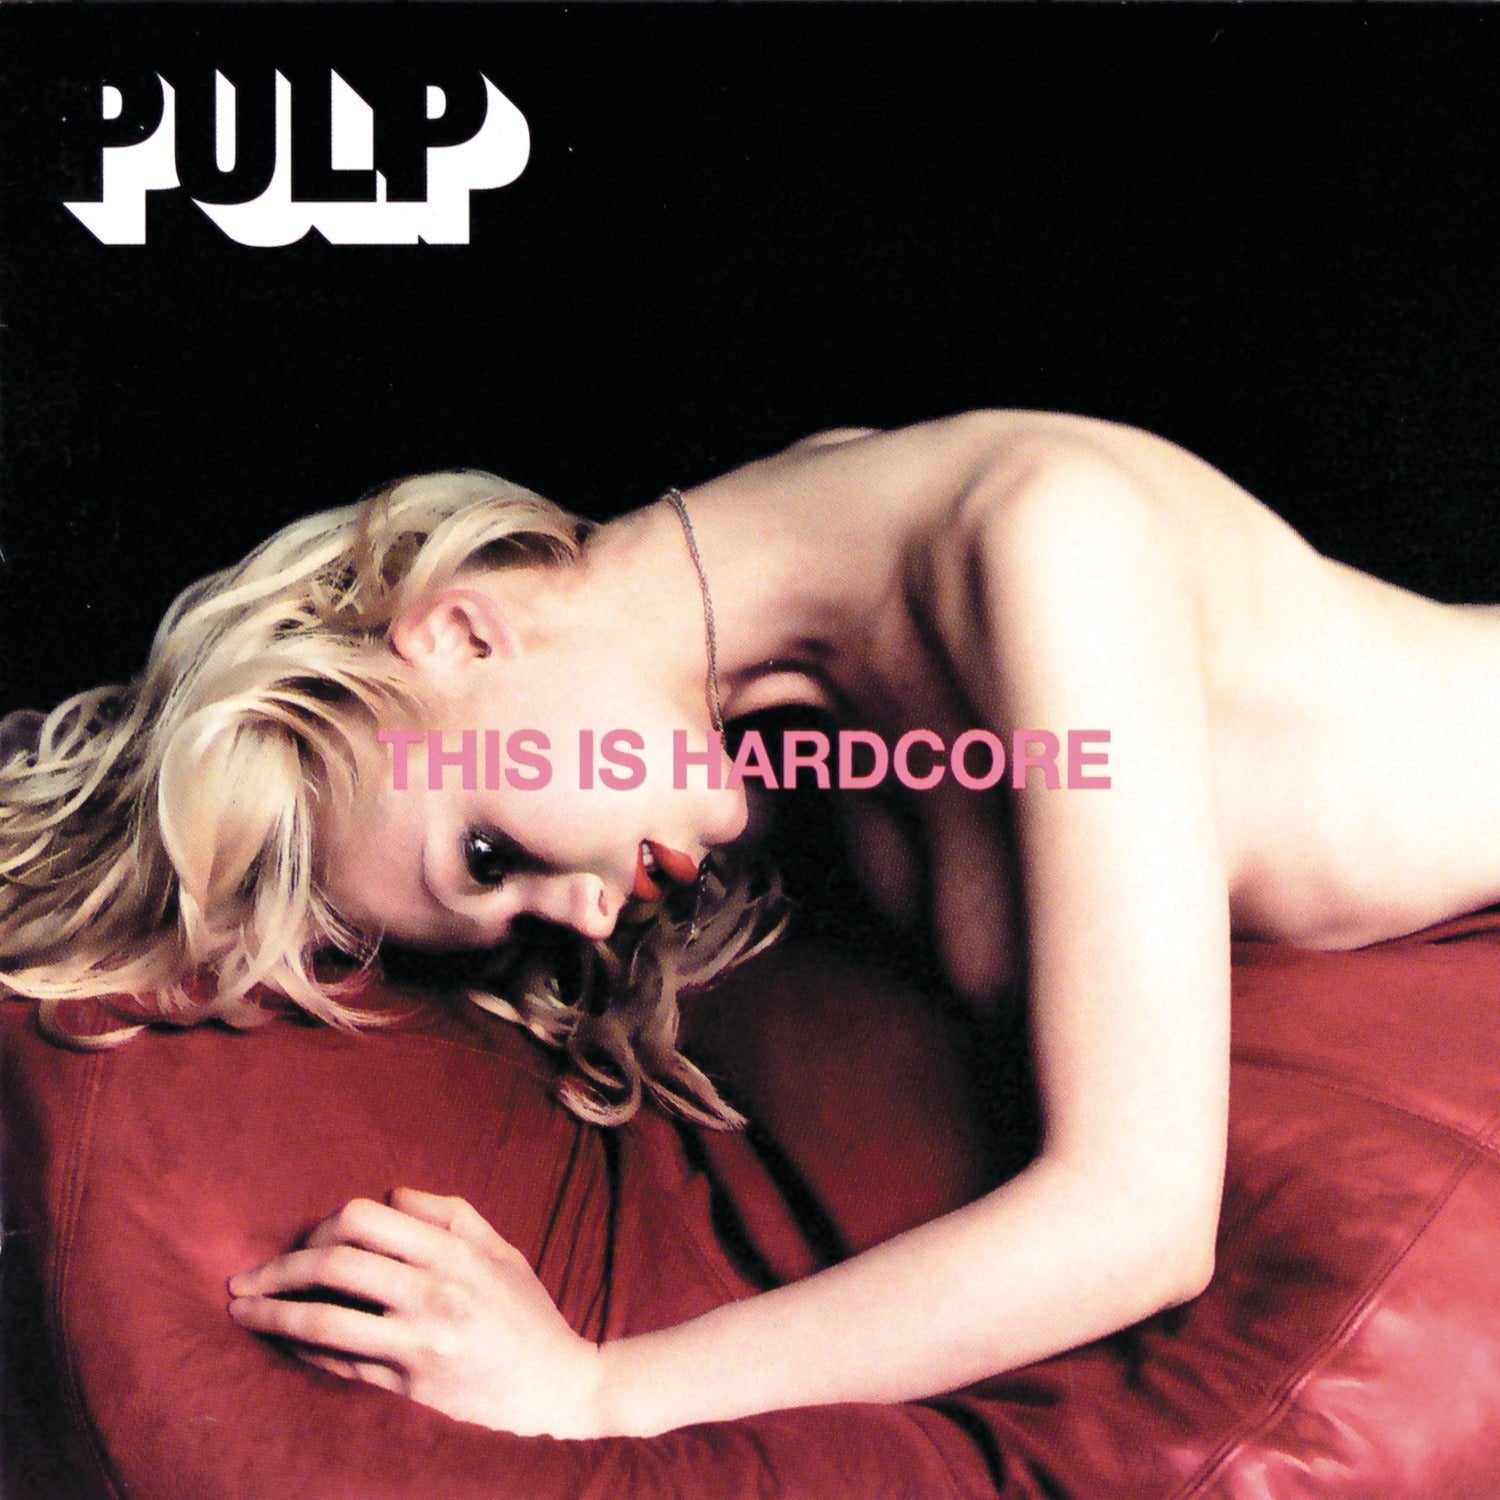 Pulp - This Is Hardcore - 33RPM